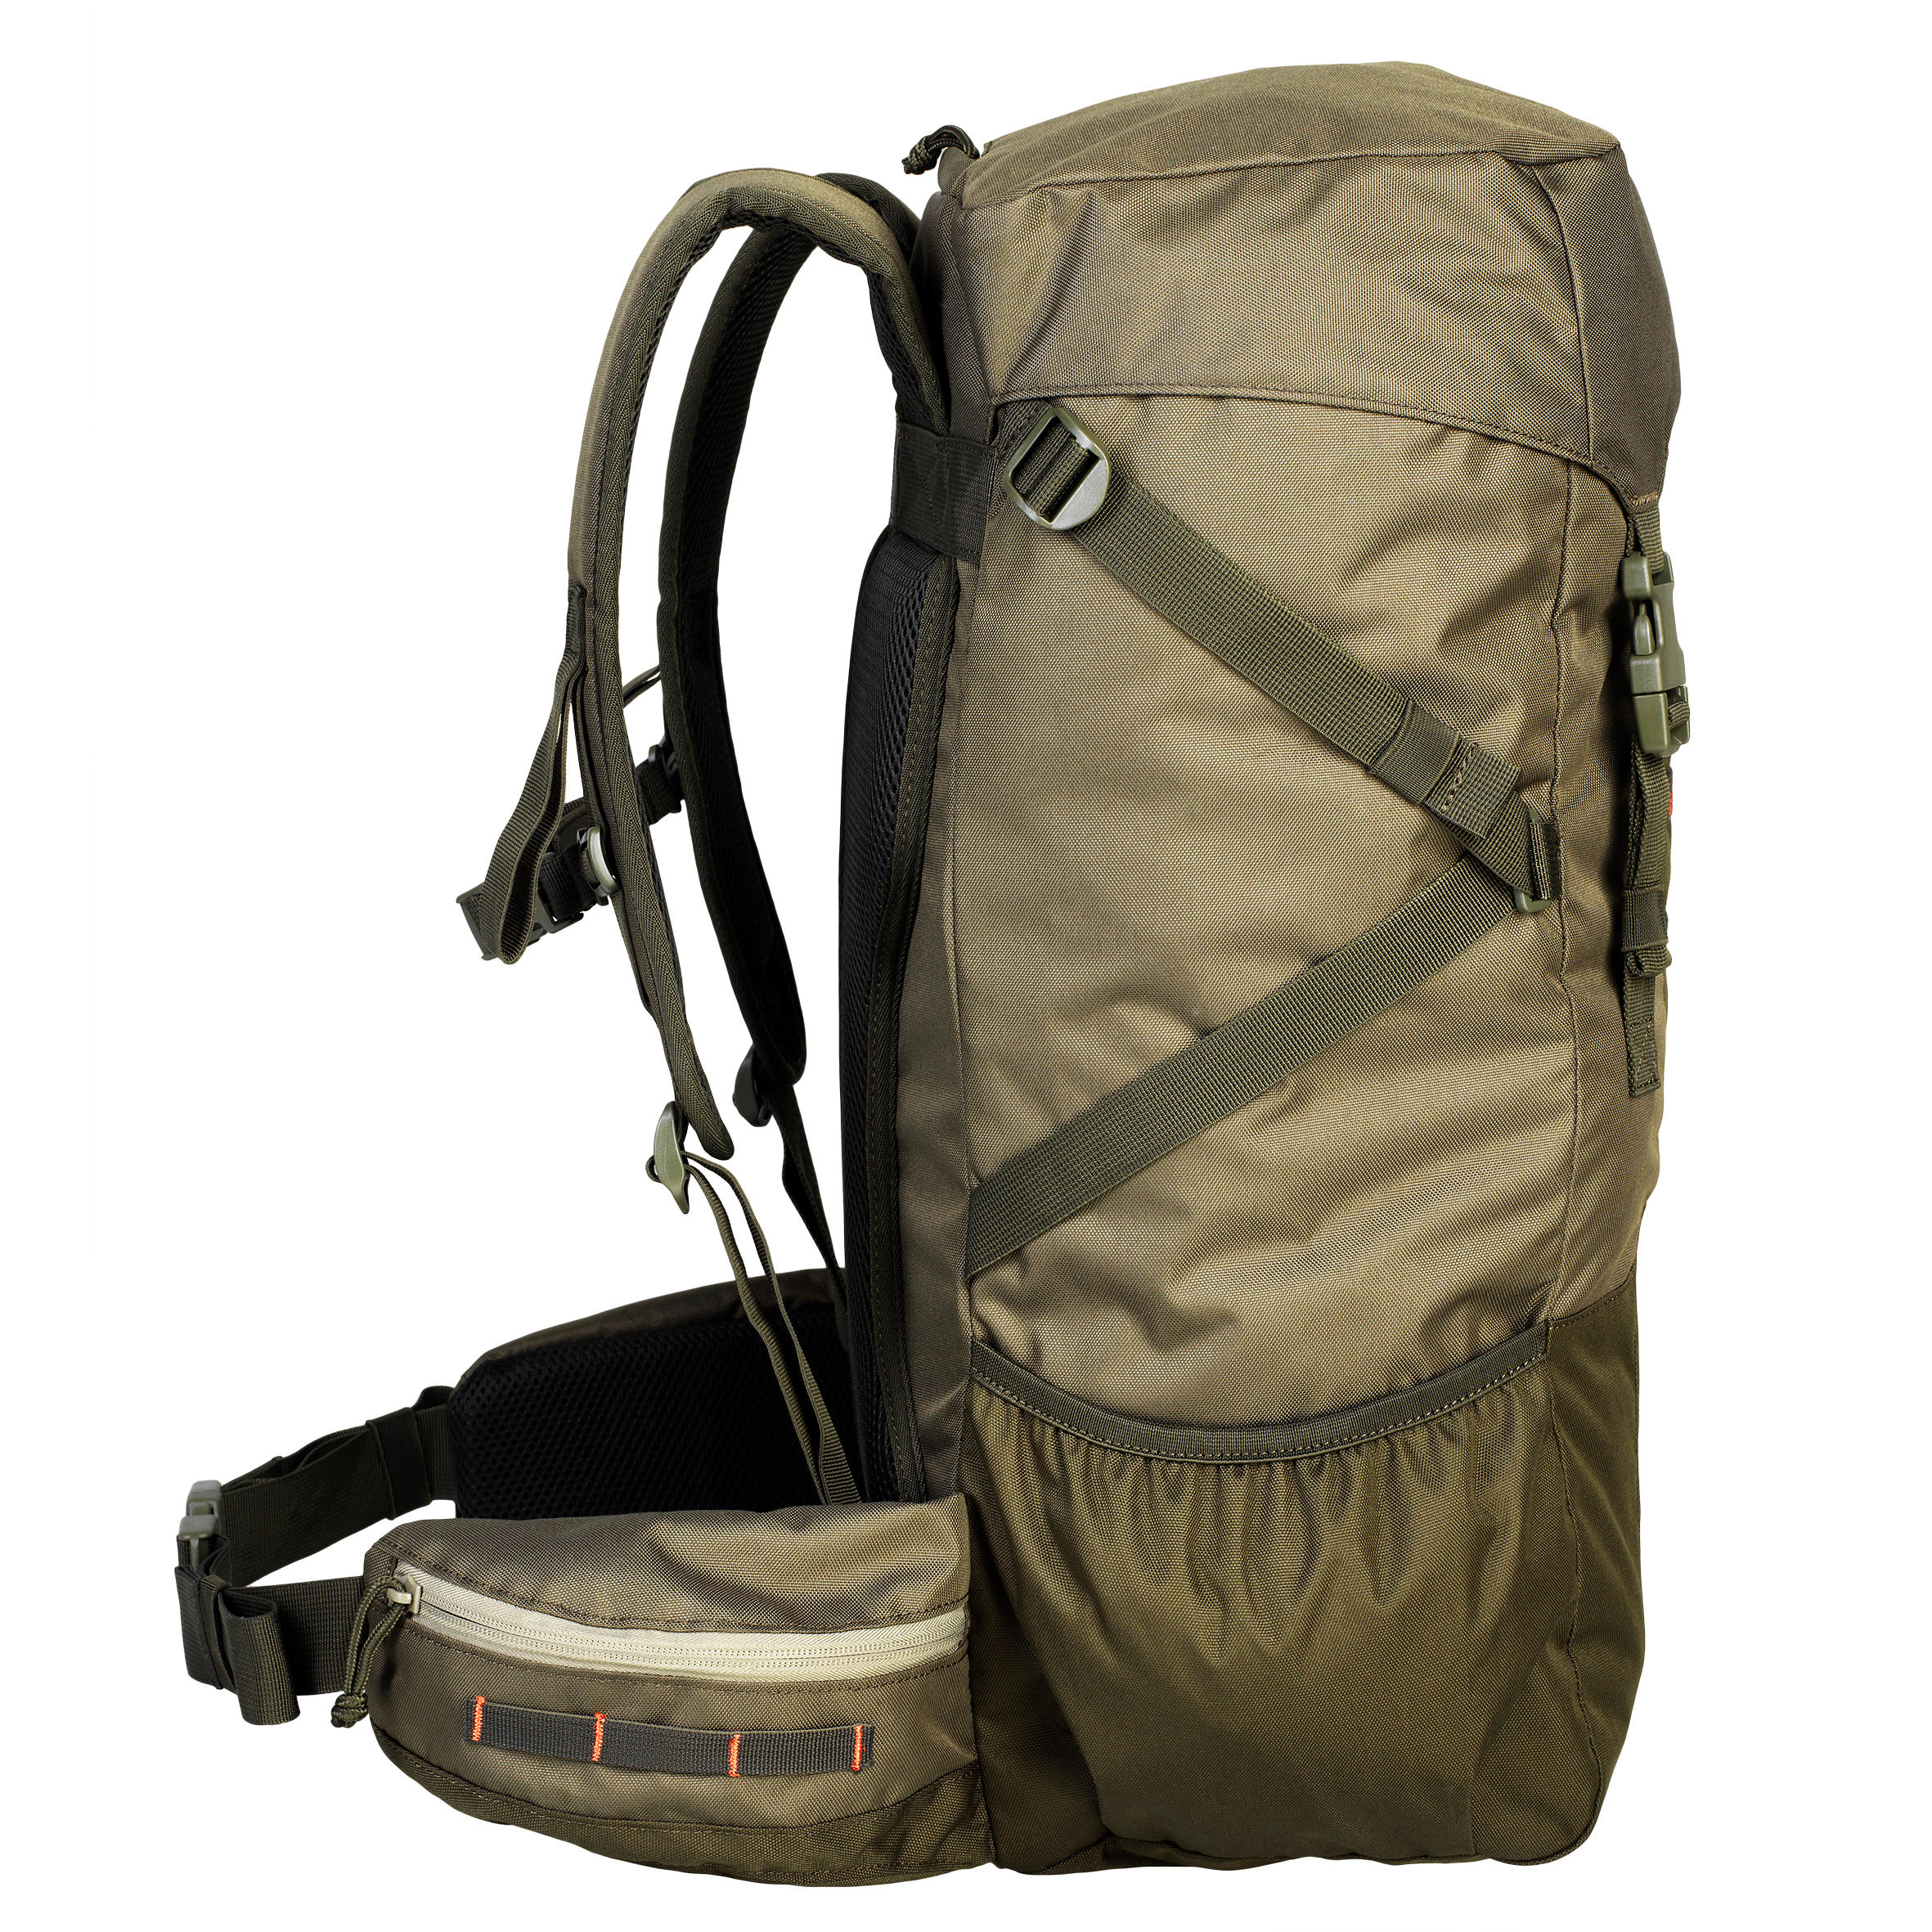 Hunting X-Access Backpack 50 Litres - Green - SOLOGNAC